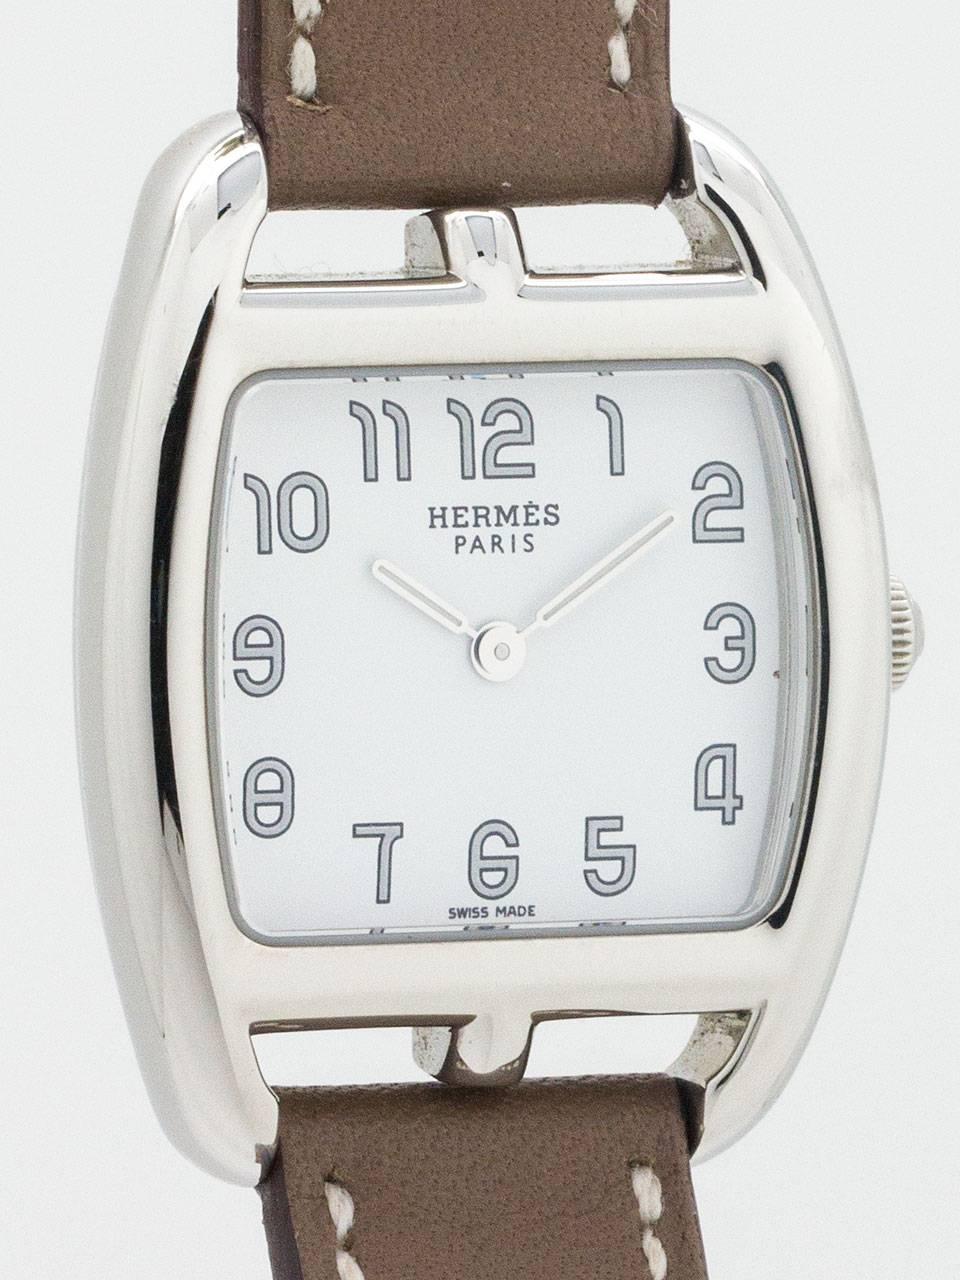 Lady Hermes Cape Cod Wristwatch circa 2000s. Featuring 26.5 x 28 mm tonneau shaped case with sapphire crystal and signed crown. White dial with silver arabic figures and straight hands. Battery powered quartz movement. With very good condition,